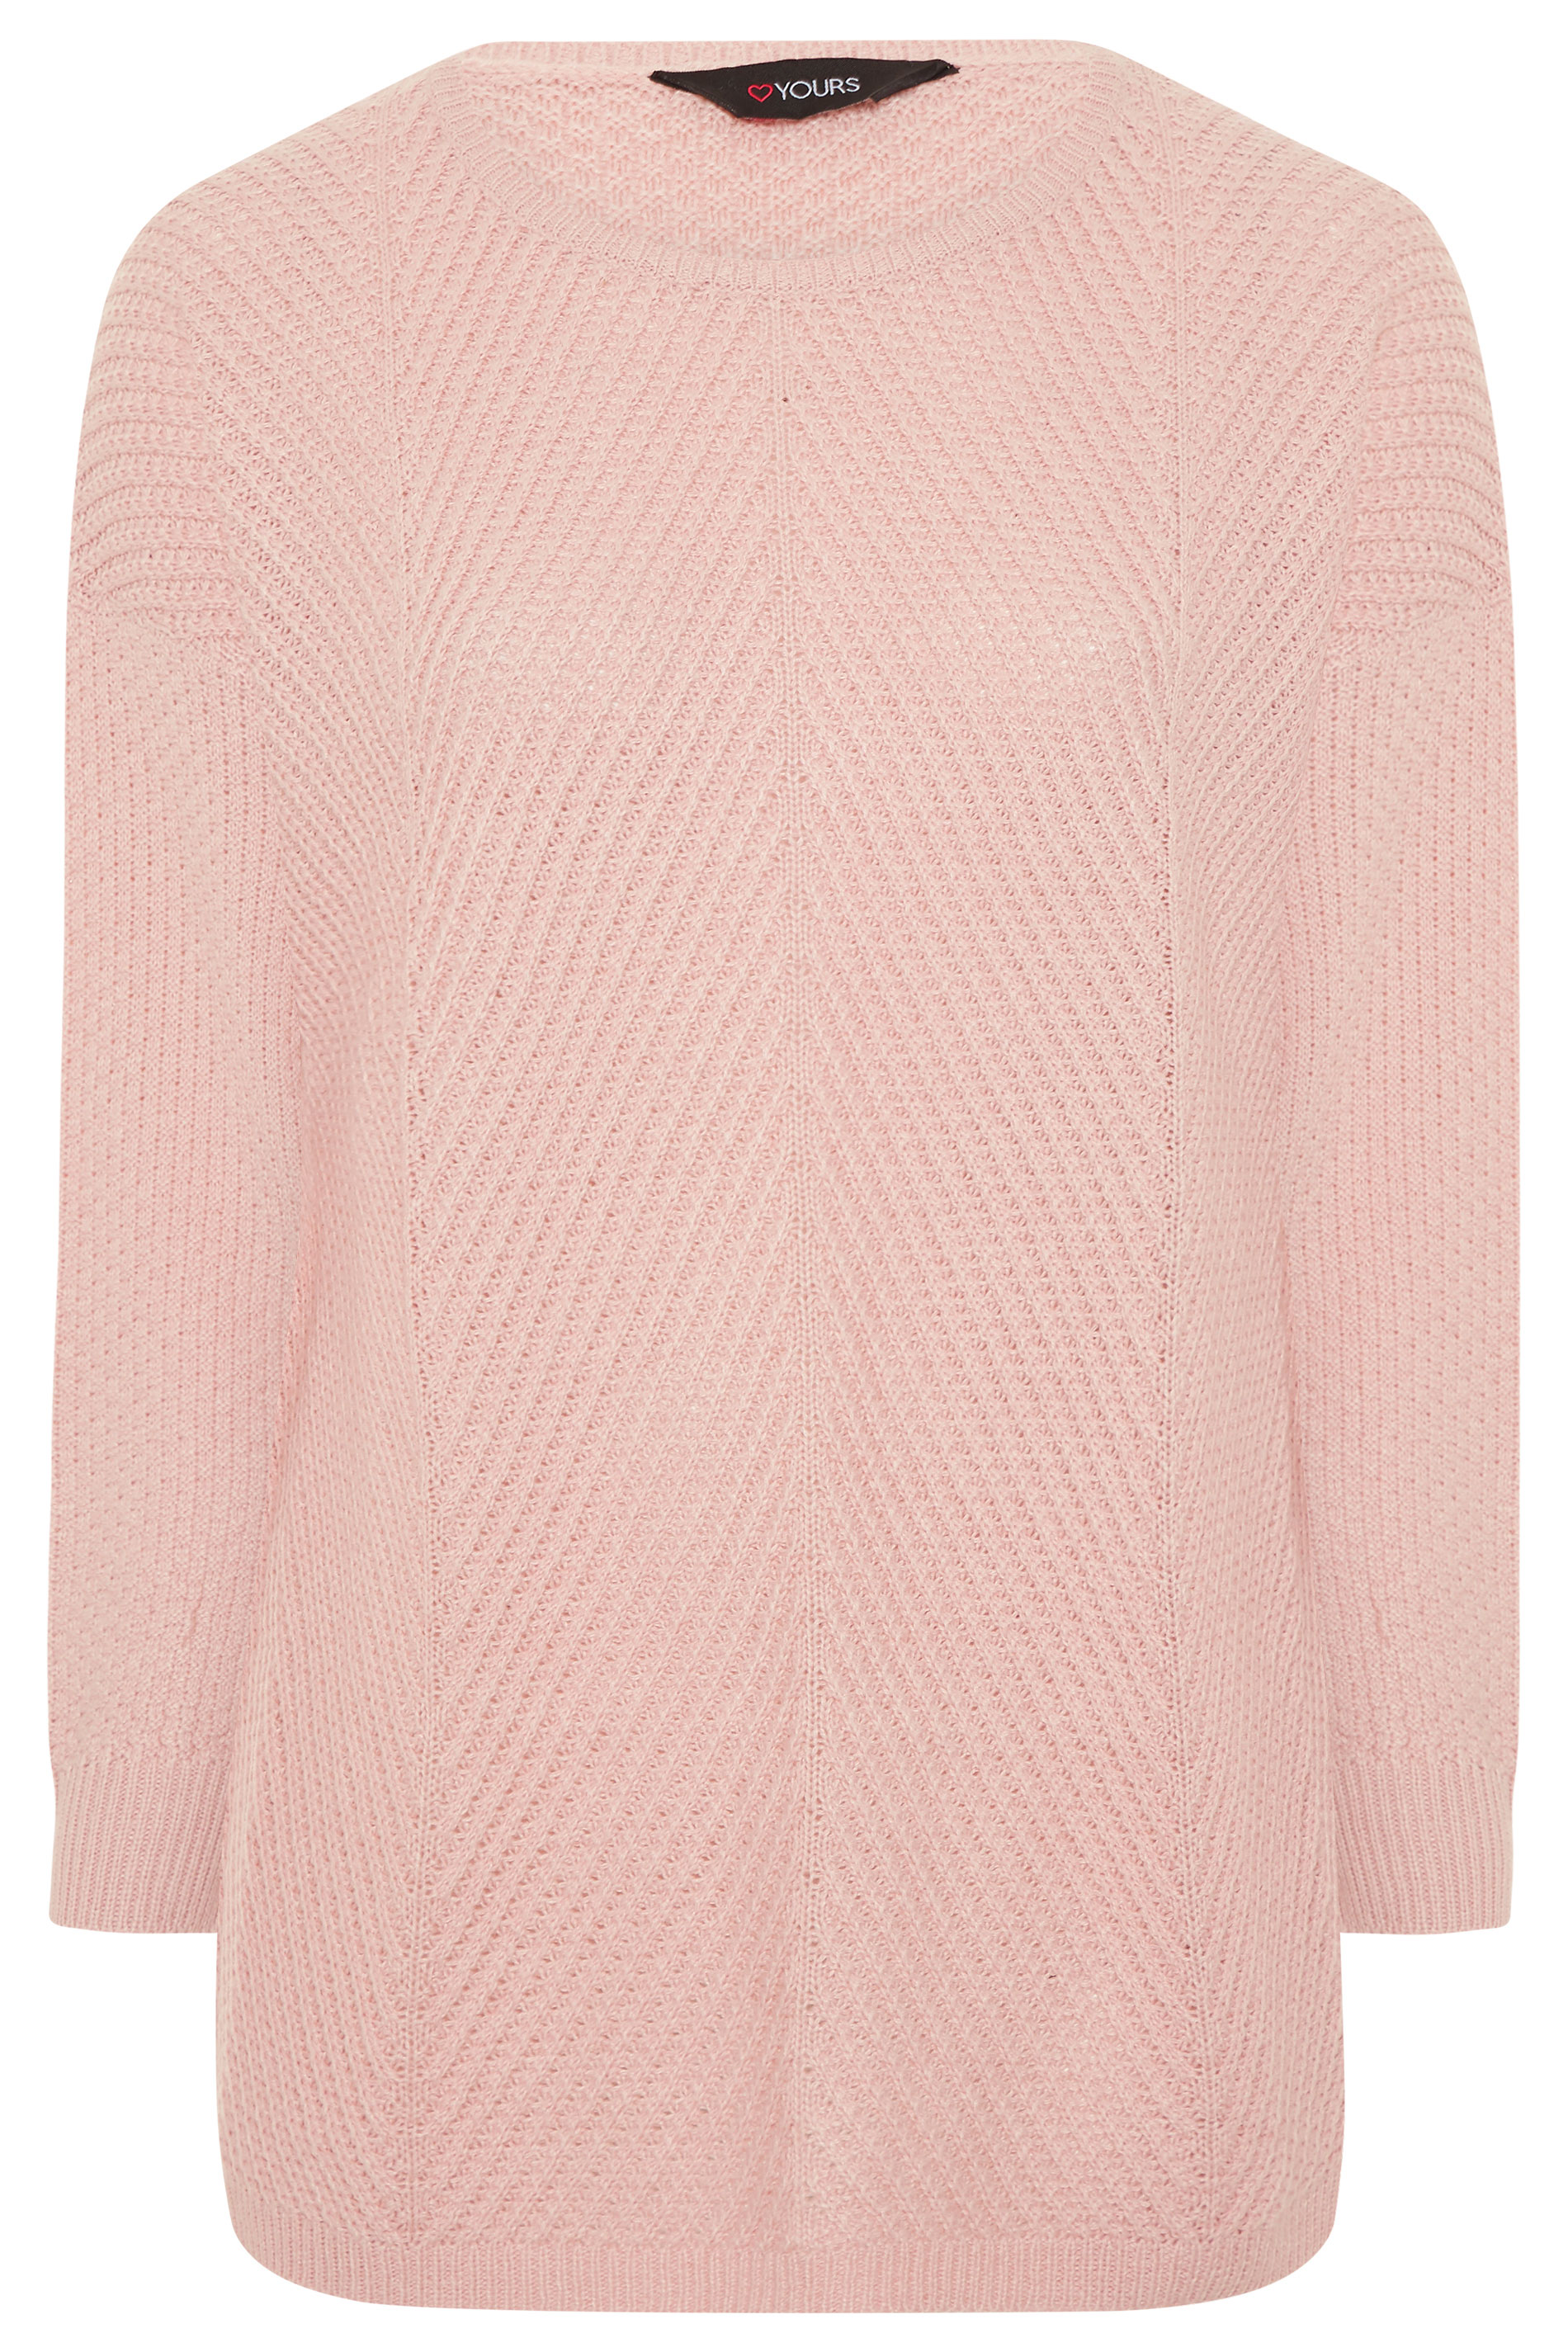 Pink Oversized Knitted Jumper | Yours Clothing